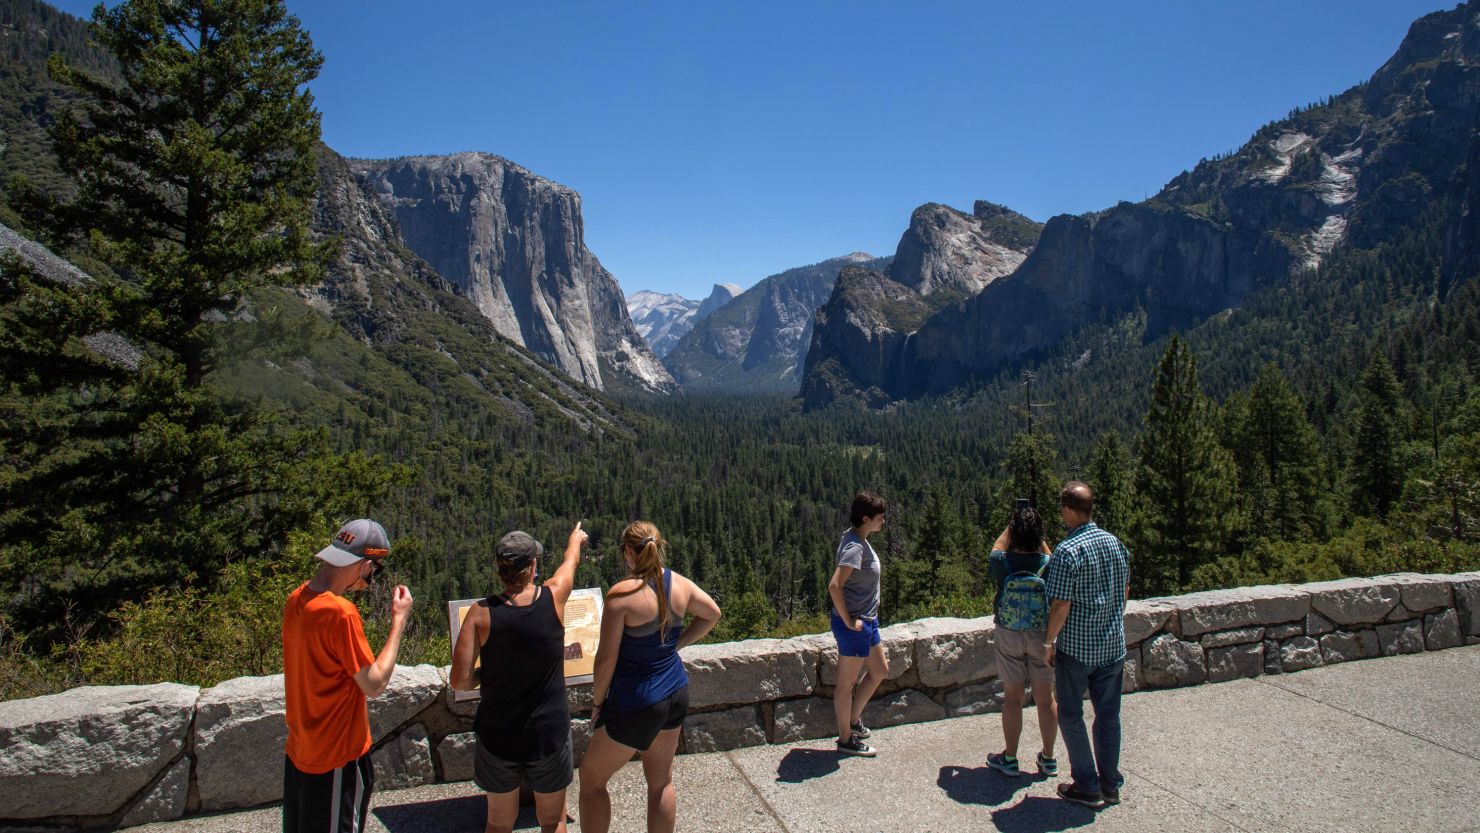 Visitors walk to the Tunnel View lookout in Yosemite Valley at Yosemite National Park, California on July 08, 2020. - After closing for 2½ months because of the coronavirus pandemic, the wildlife is taking over of areas used by the public. The park is open with limited services and facilities to those with day-use reservations, reservations for in-park lodging or camping, and wilderness or Half Dome permits. (Photo by Apu GOMES / AFP) (Photo by APU GOMES/AFP via Getty Images)